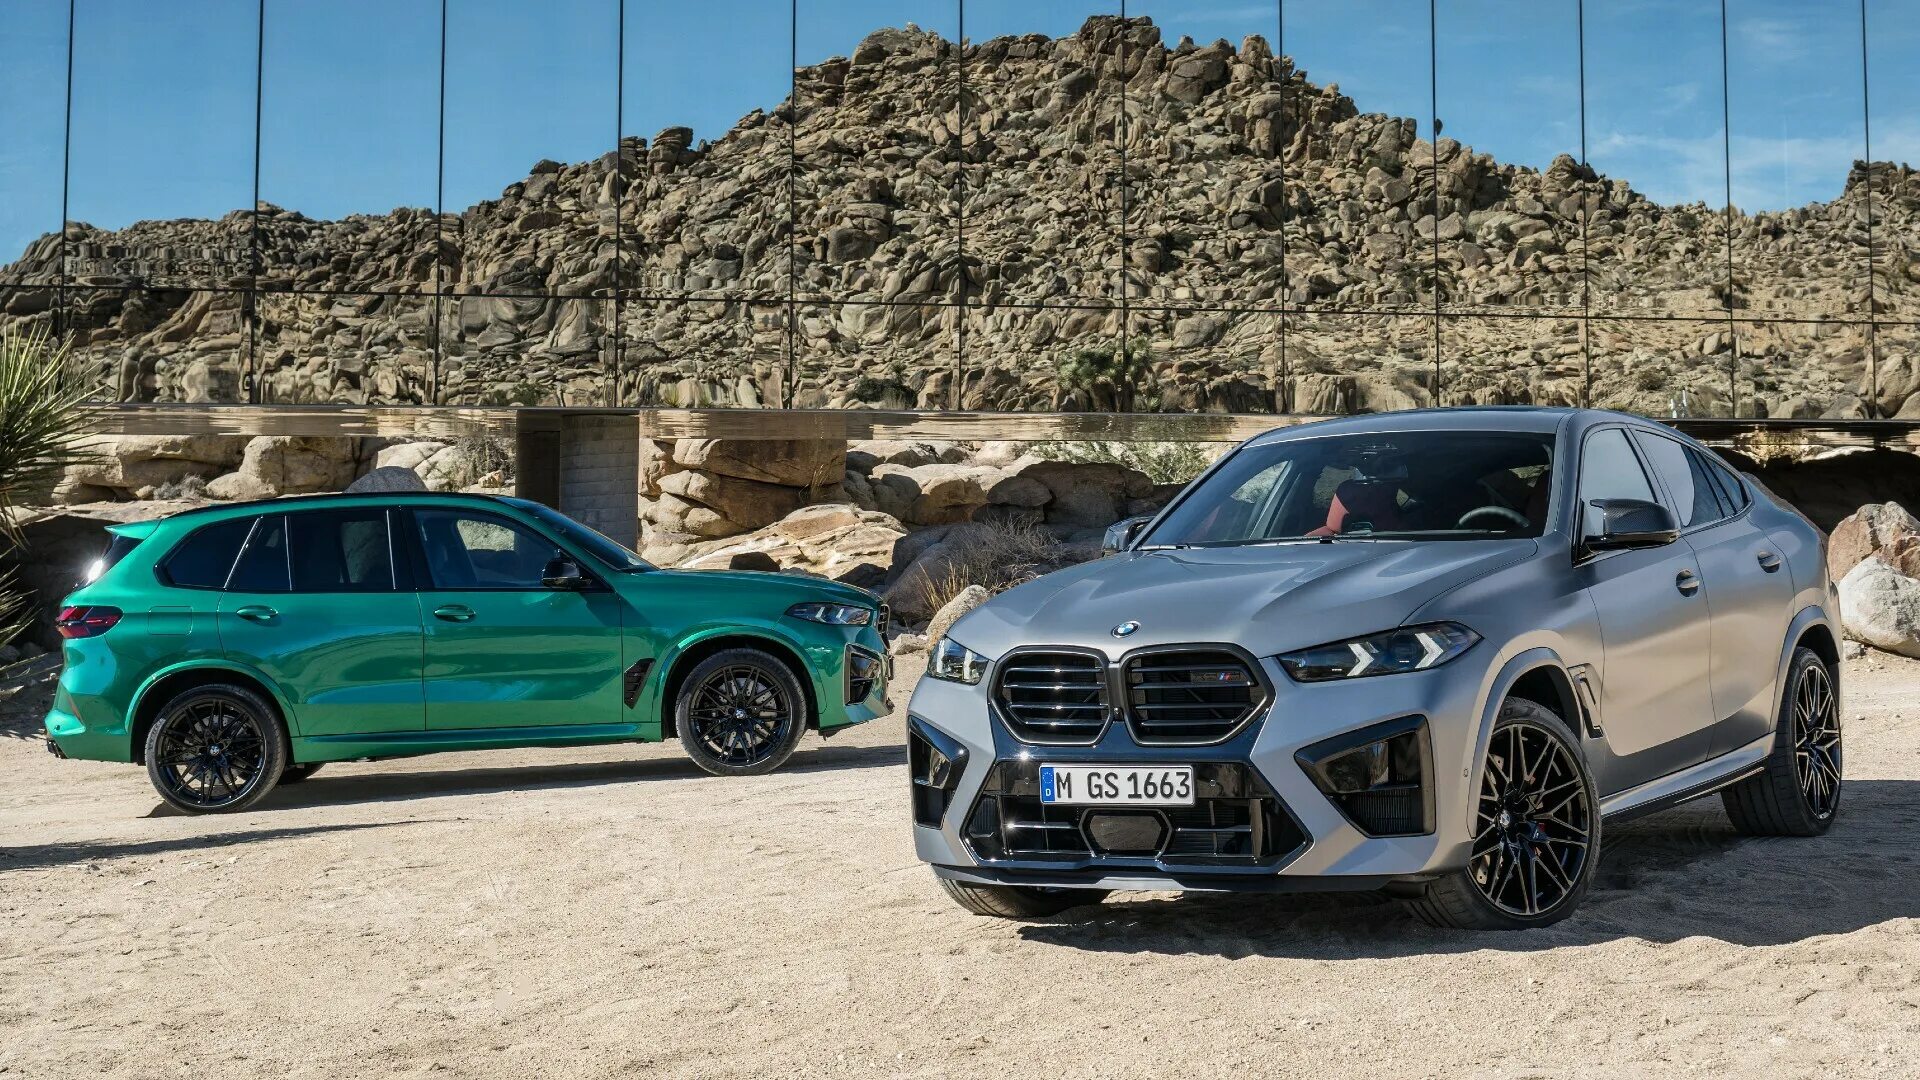 BMW x6m Competition 2023. БМВ x5m 2023 Competition. BMW x6 m Competition 2022. БМВ x6 m 2023 x6m Competition.